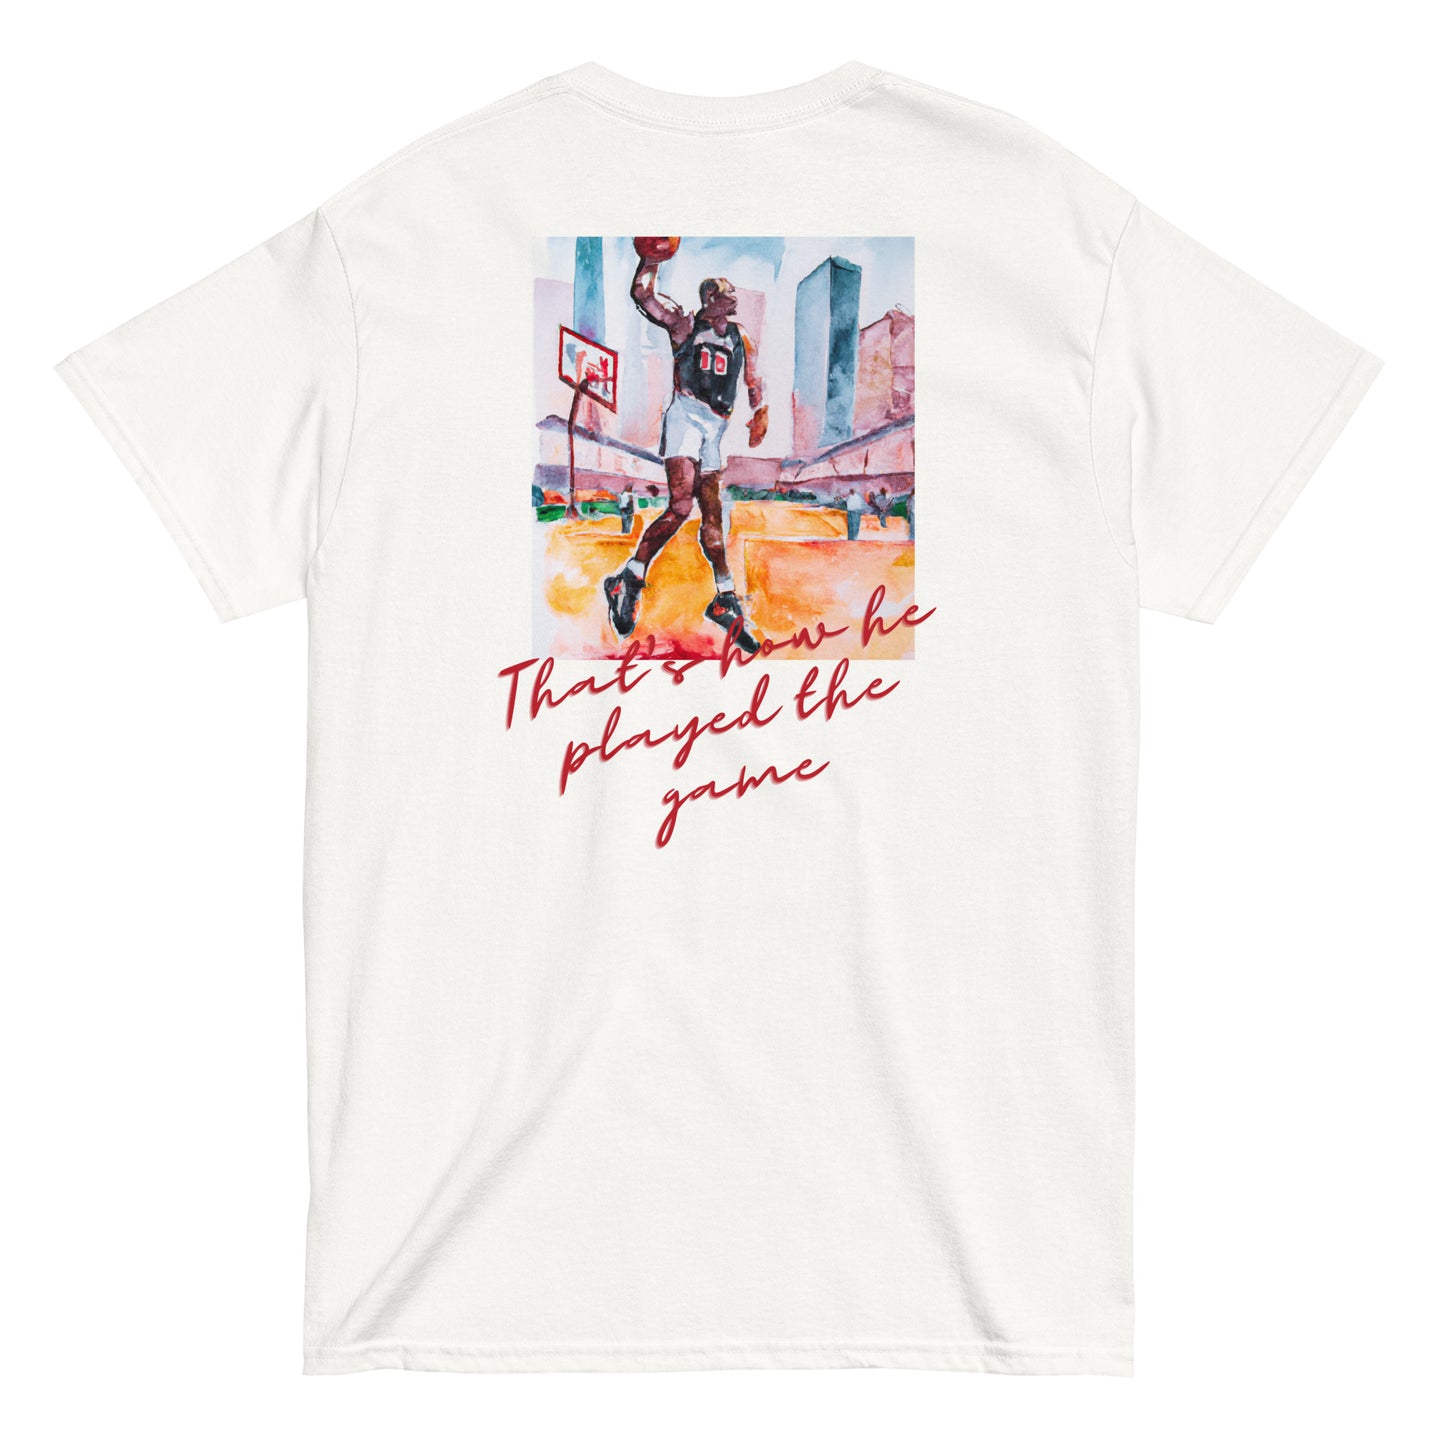 “That's How He Played The Game” Embroidered T-shirt - White